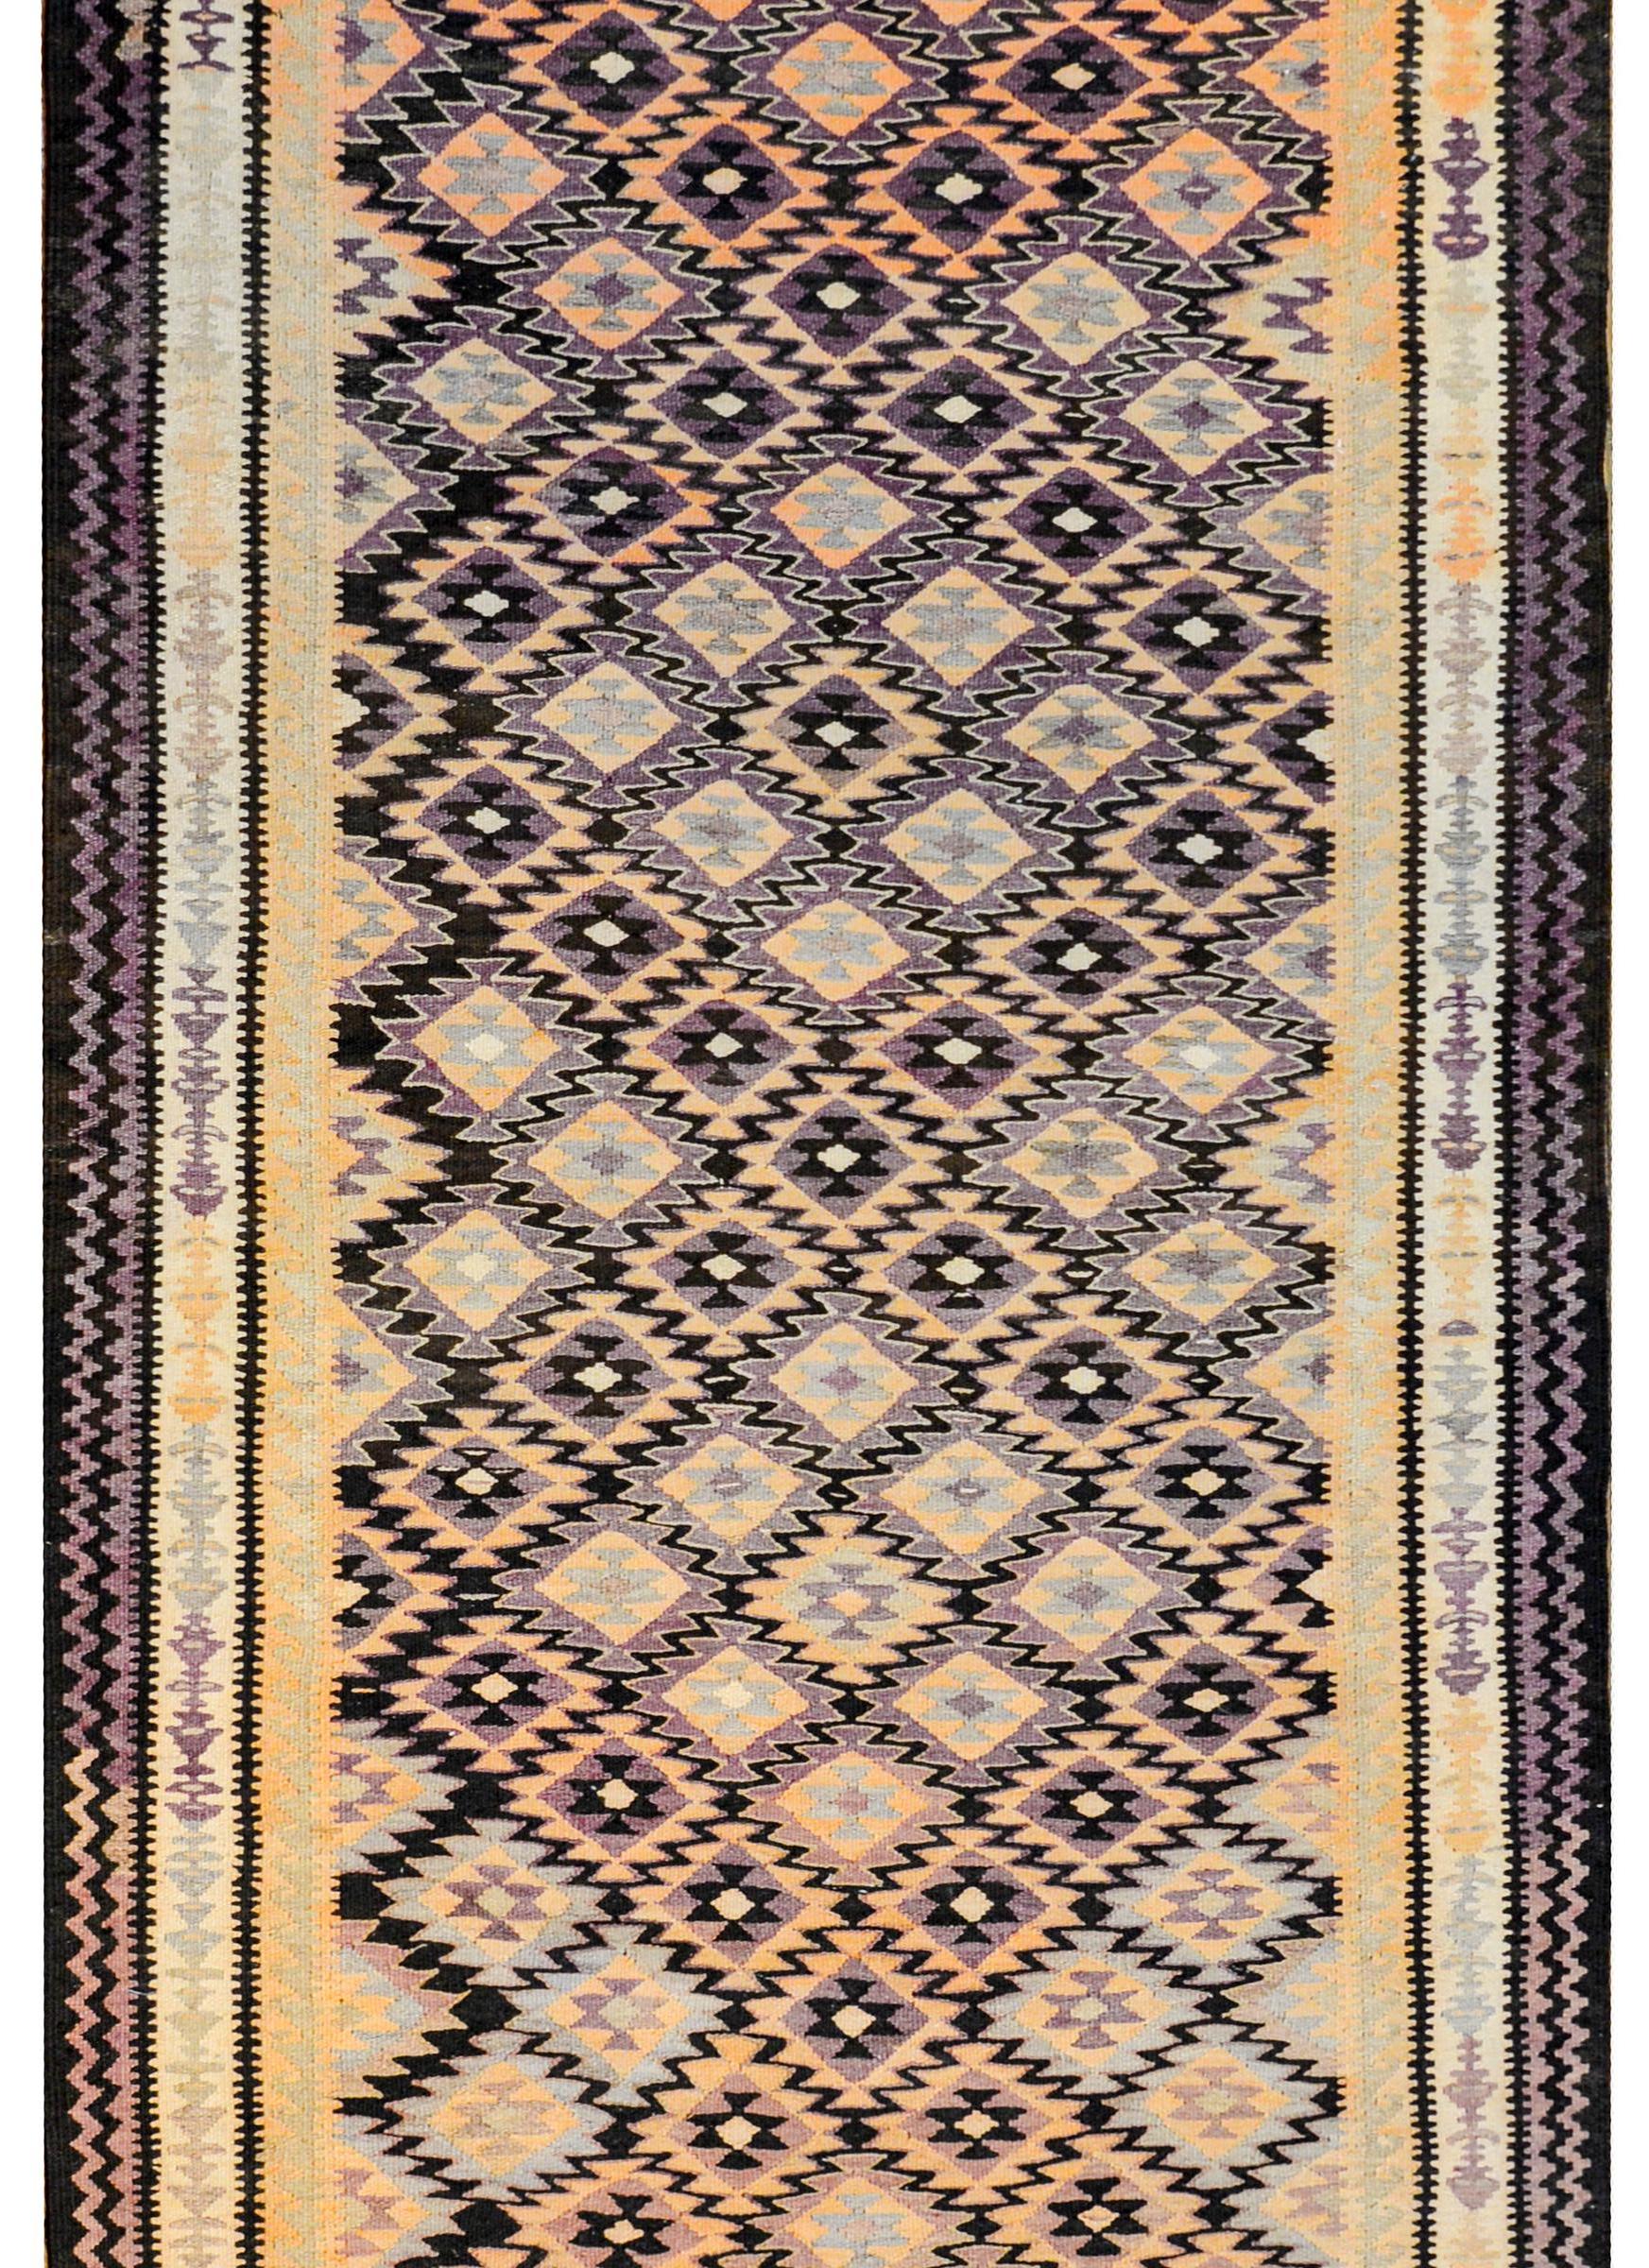 A fantastic early 20th century Persian Qazvin kilim runner with a wonderful geometric pattern of multi-pointed stylized flowers woven in orange, lilac, grey, and black colored wool arranged in a way that a zigzag pattern is created across the field.